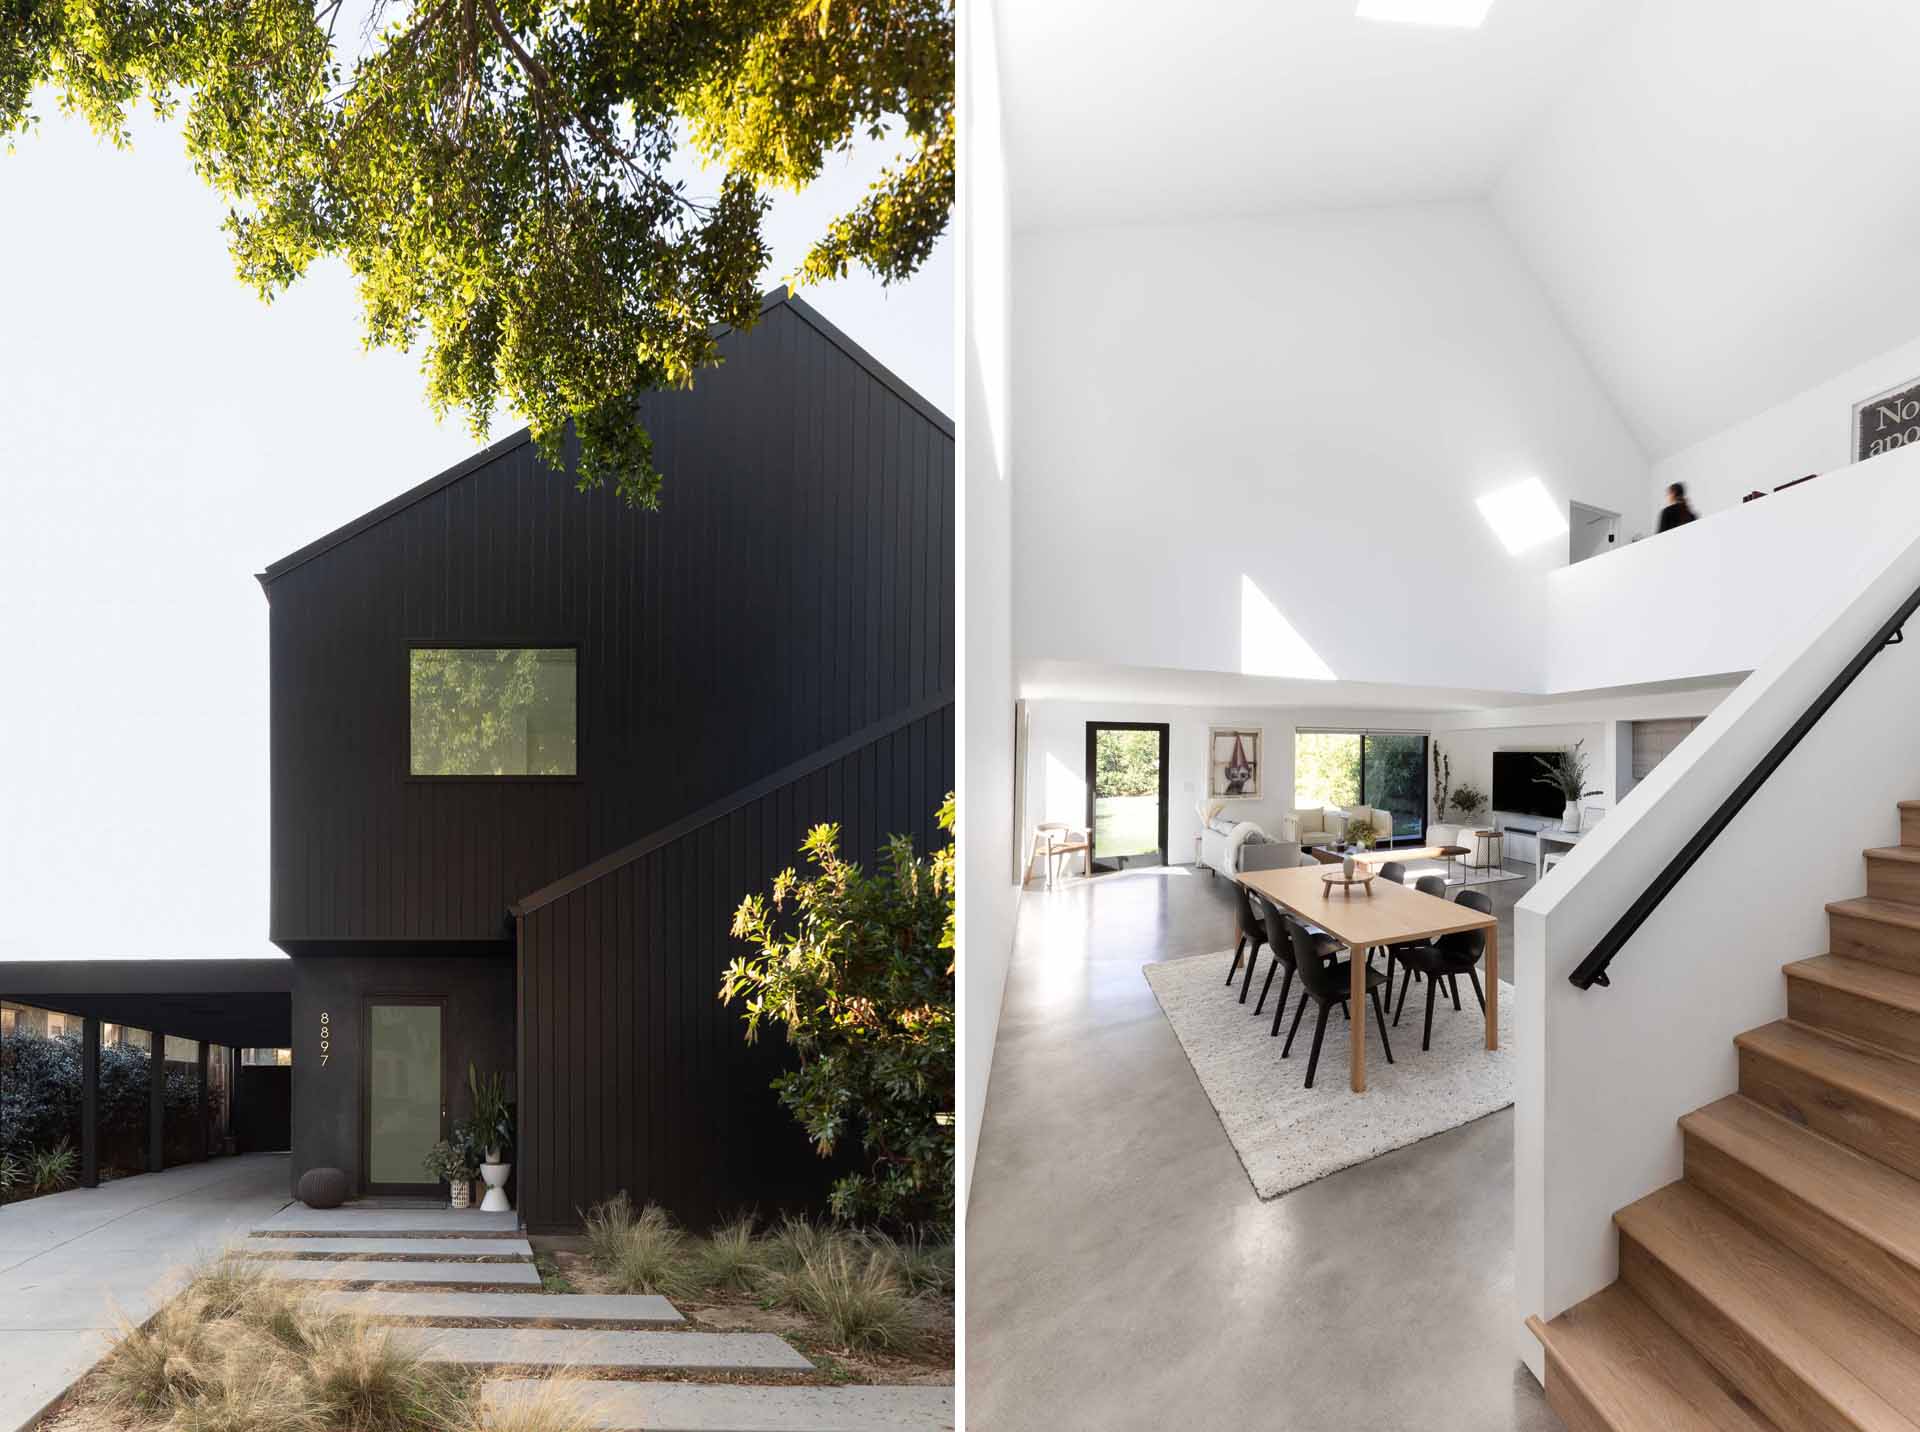 A modern barn-inspired home with a black exterior and bright white interior.